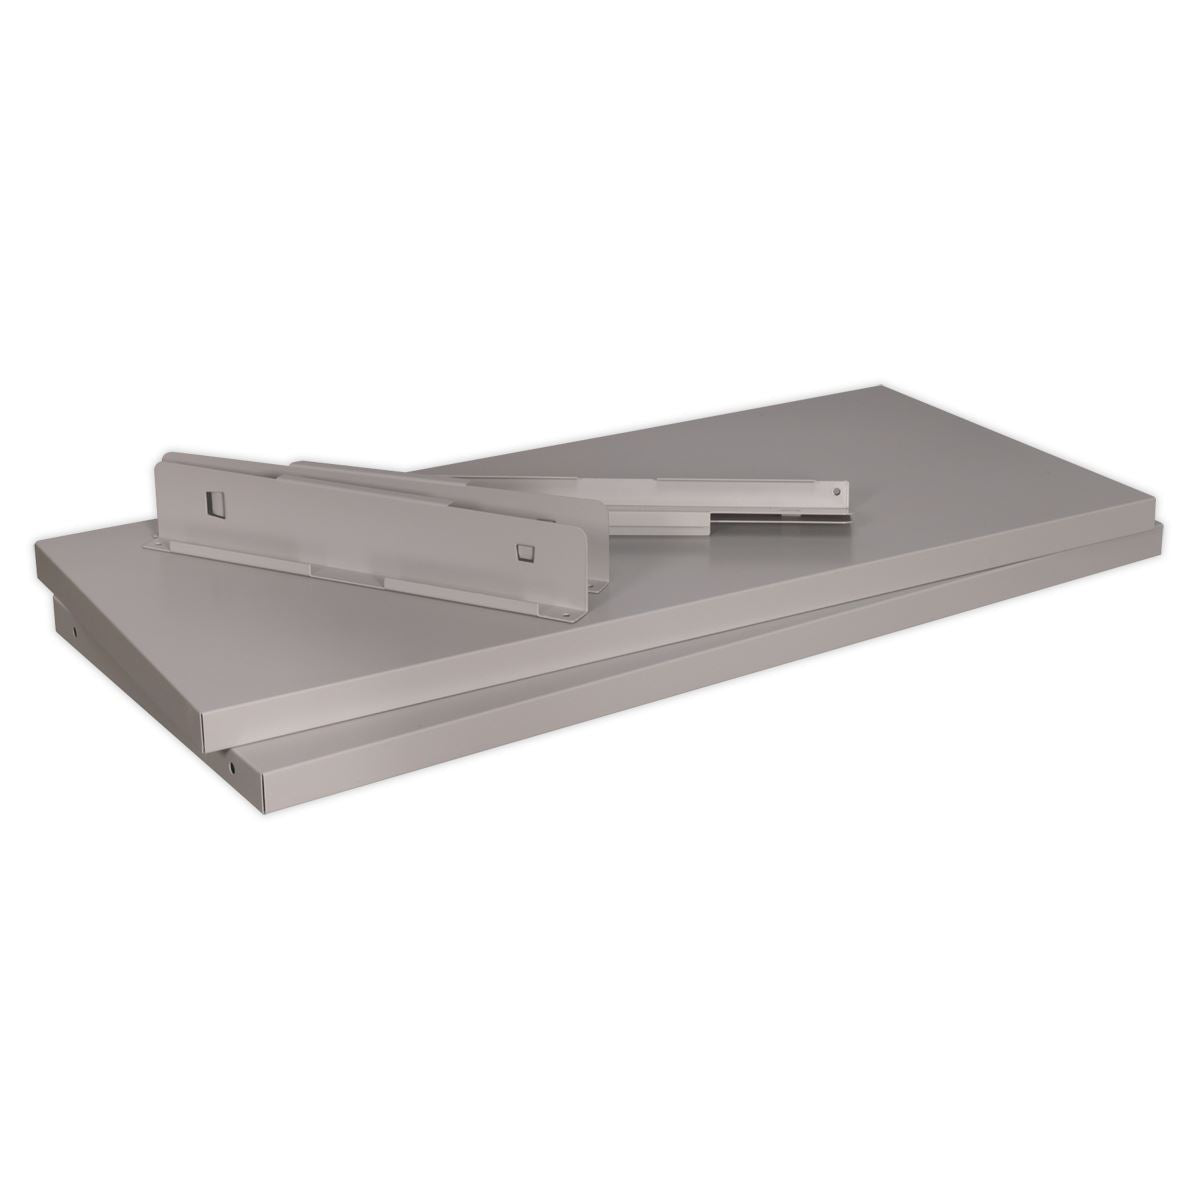 Sealey Premier Industrial Shelf for Industrial Cabinets - Pack of 2